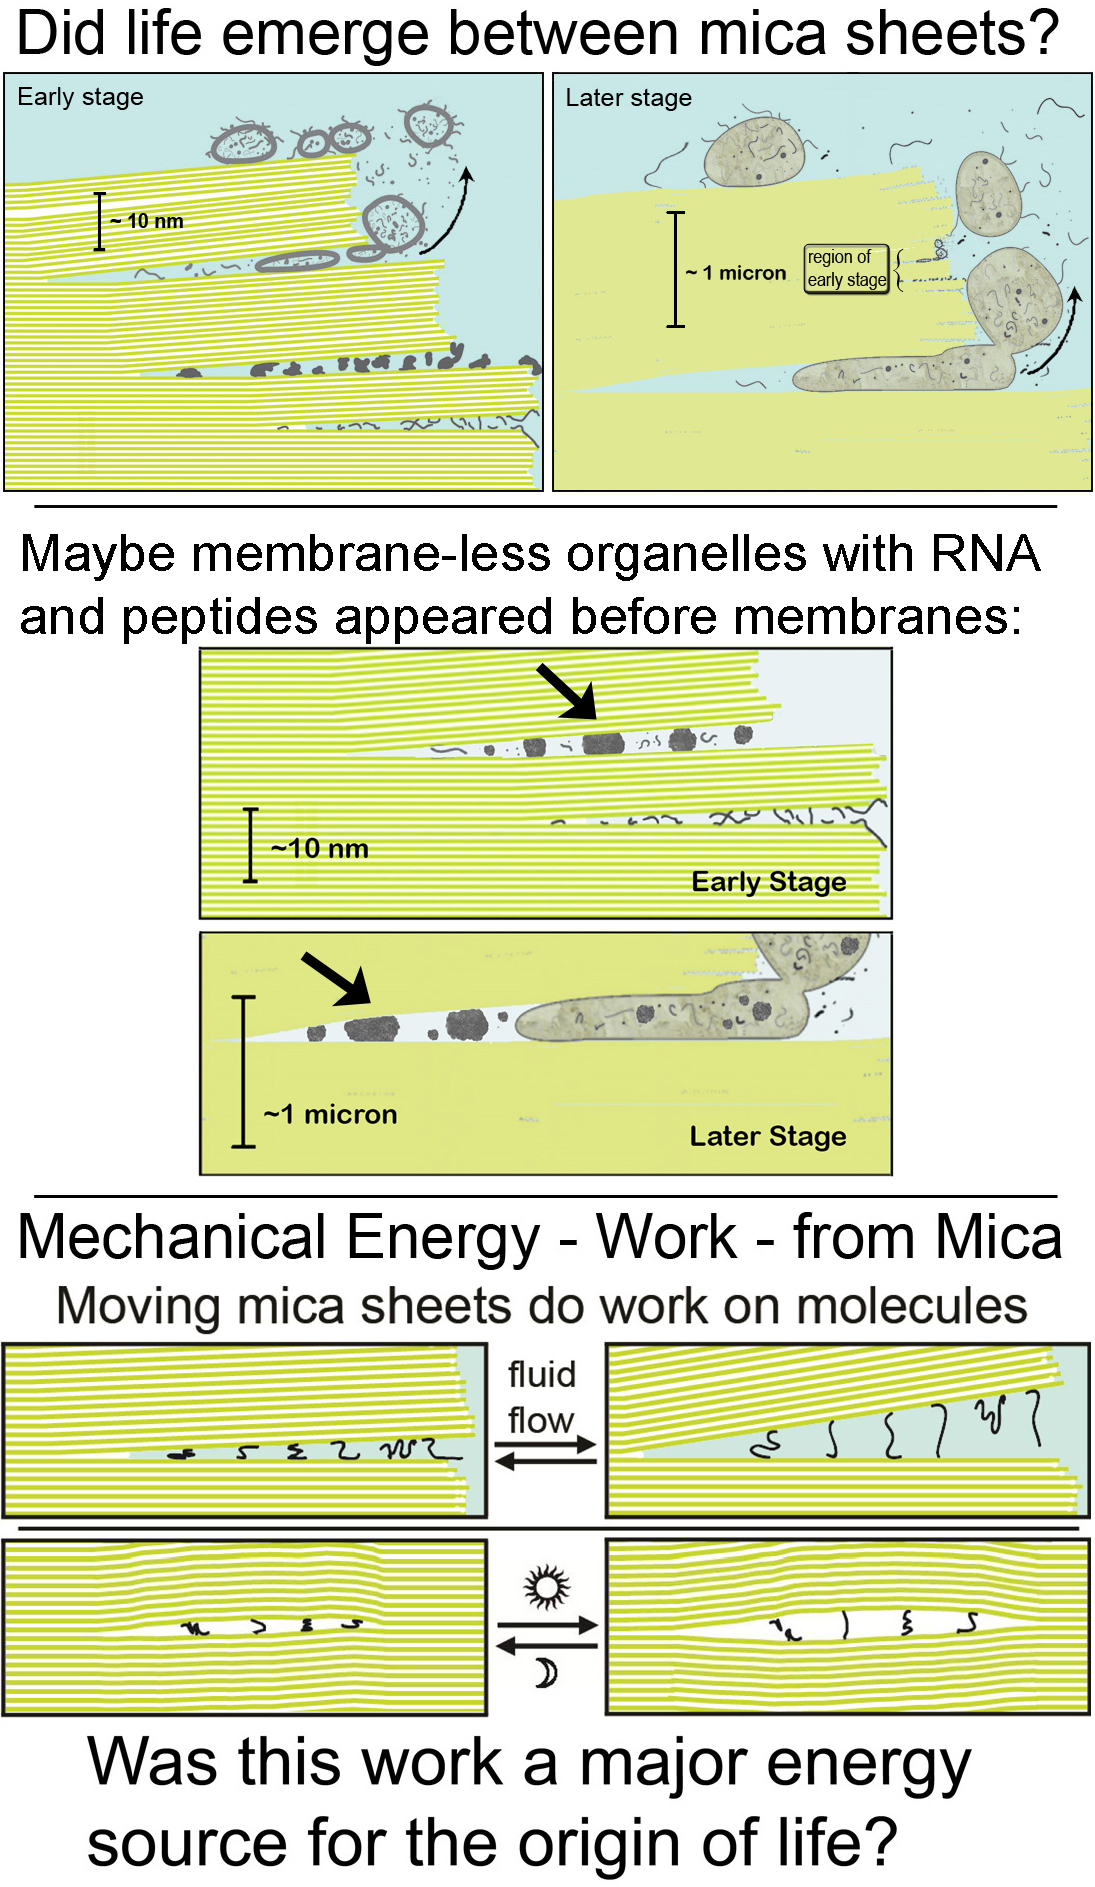 Mica World: mechanical energy and membraneless organelles before membranes?